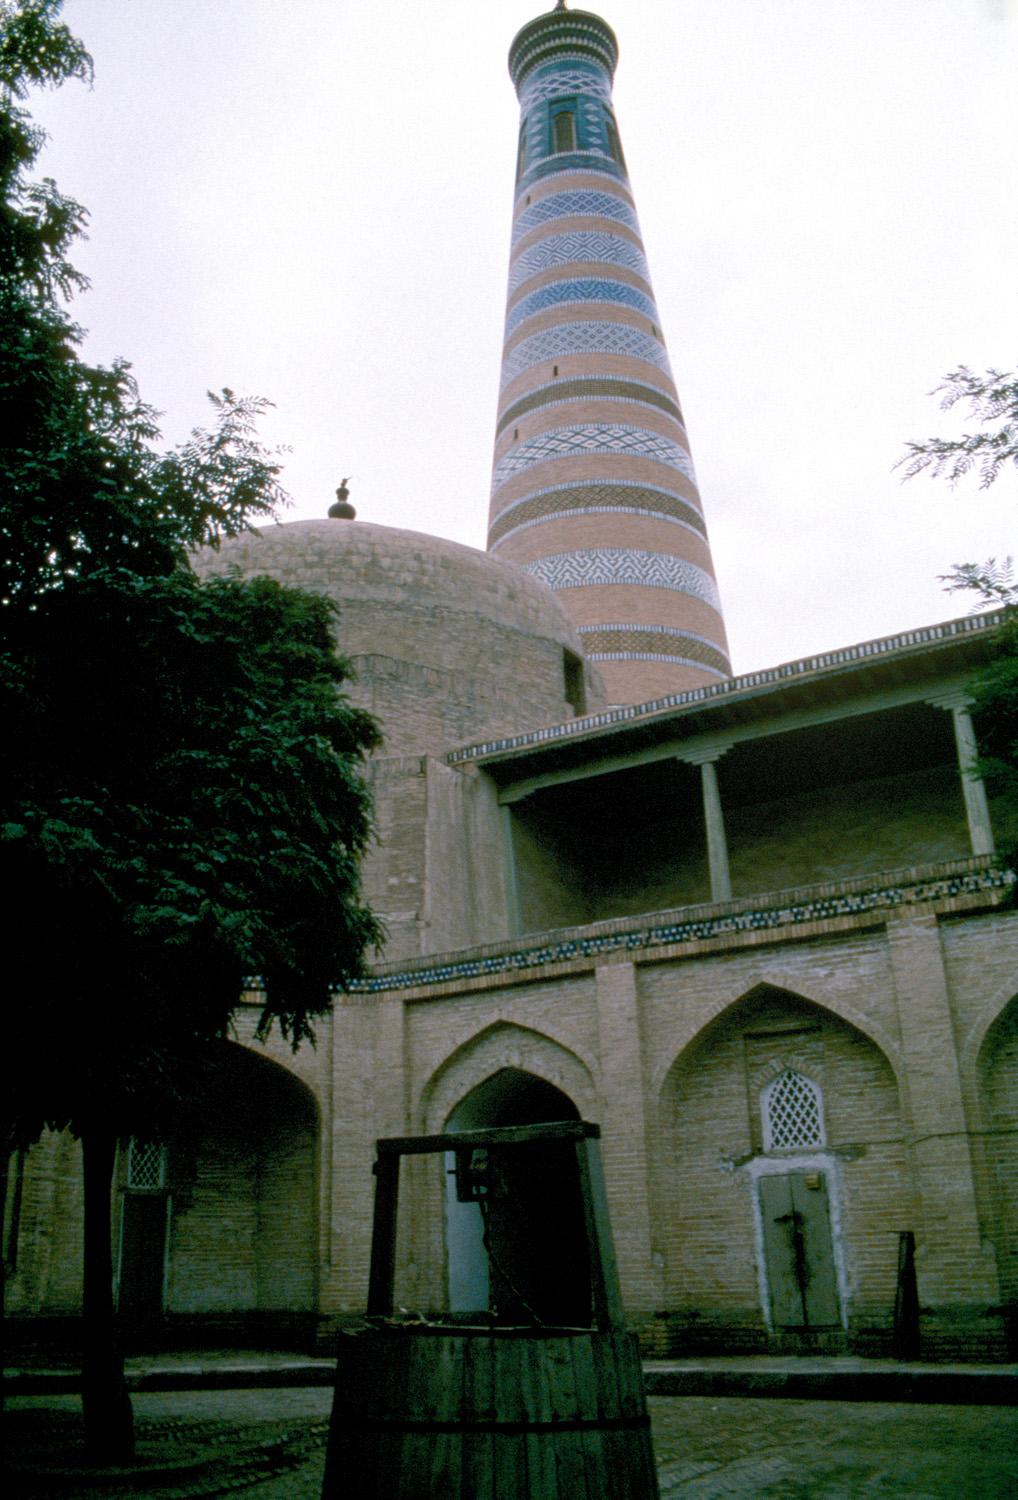 View of the courtyard, with minaret seen beyond